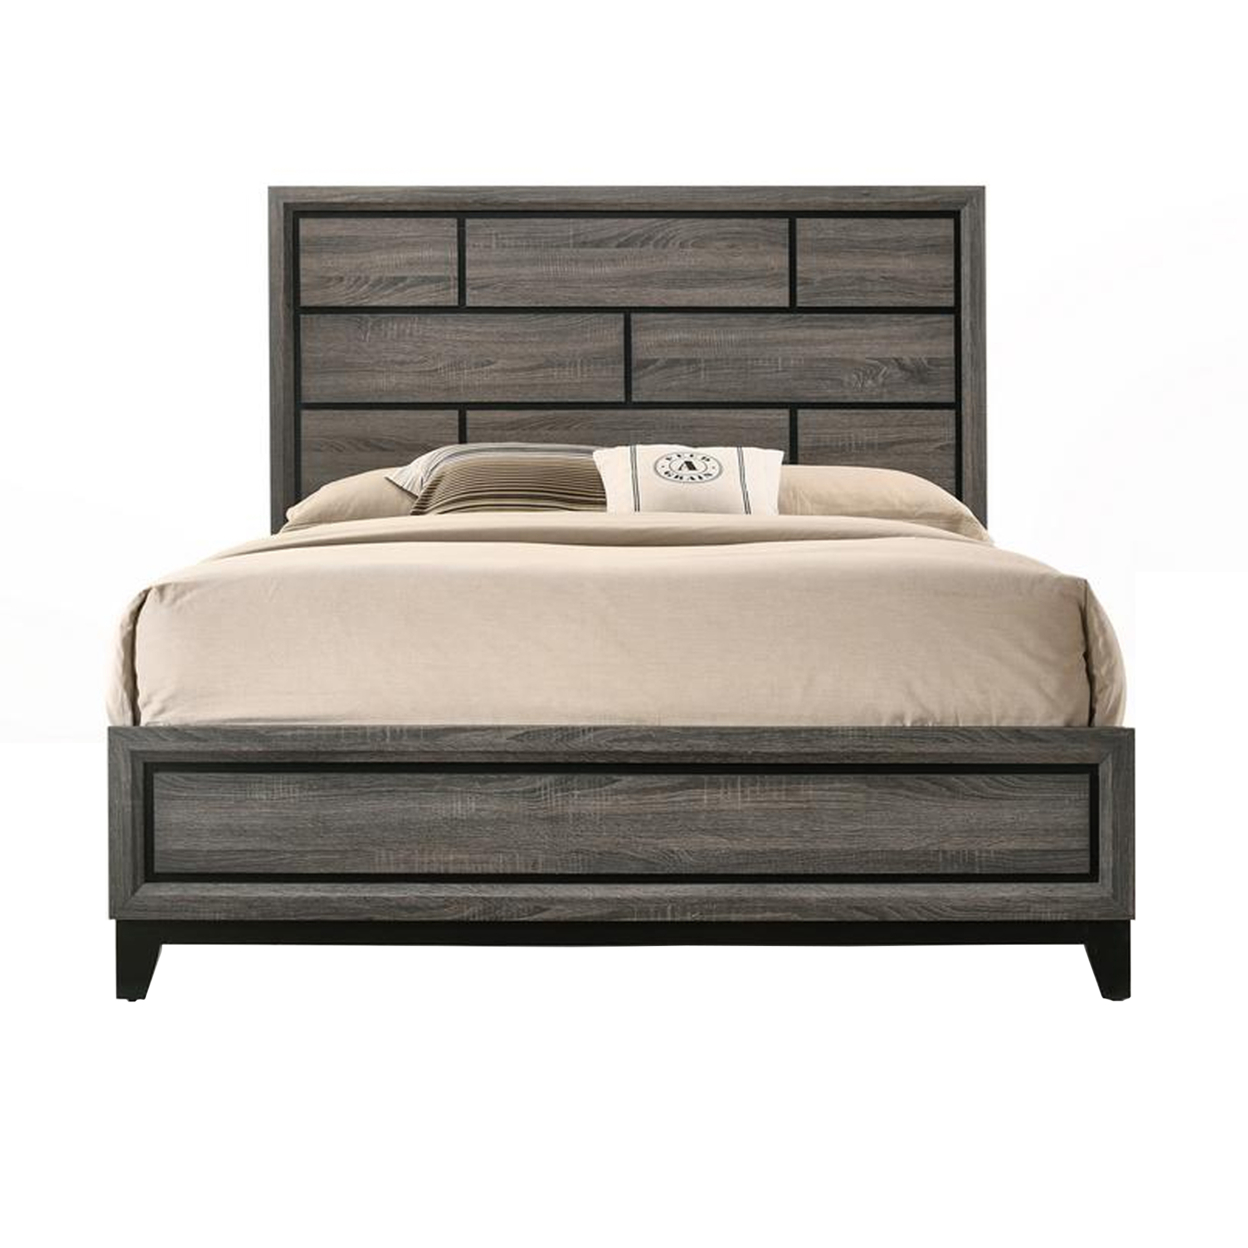 Transitional Style Wooden Queen Size Bed With Brick Elements Panel Headboard, Gray- Saltoro Sherpi